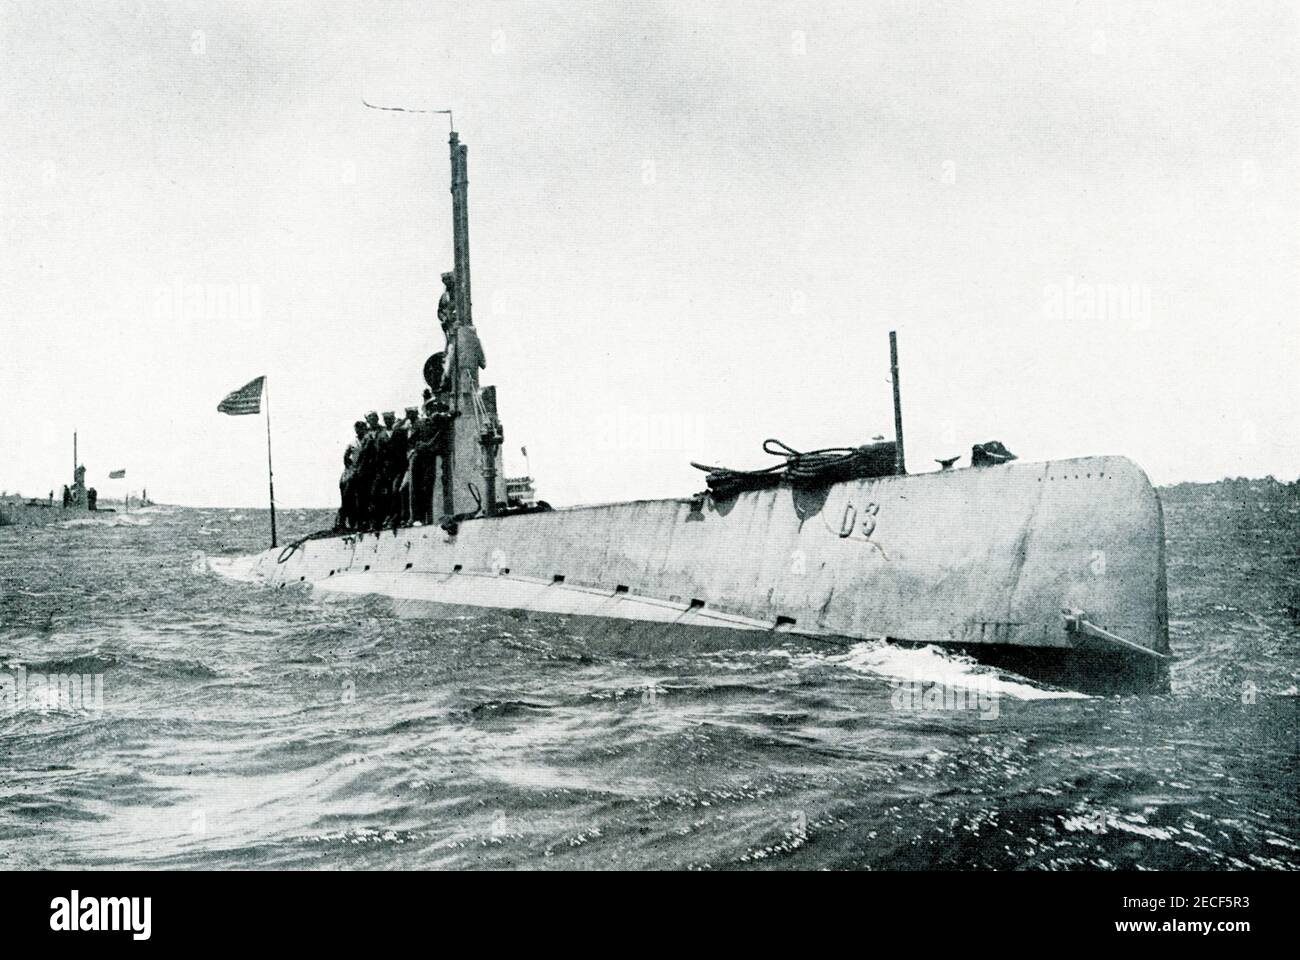 This photo by  E Muller Jr. from World War I shows an american submarine on the surface. Robert Enrique Muller sometimes credited as Enrique Muller, Jr. and as E. Muller, was an official photographer for the United States Navy, and an author. He took photos of military ships in action. Stock Photo